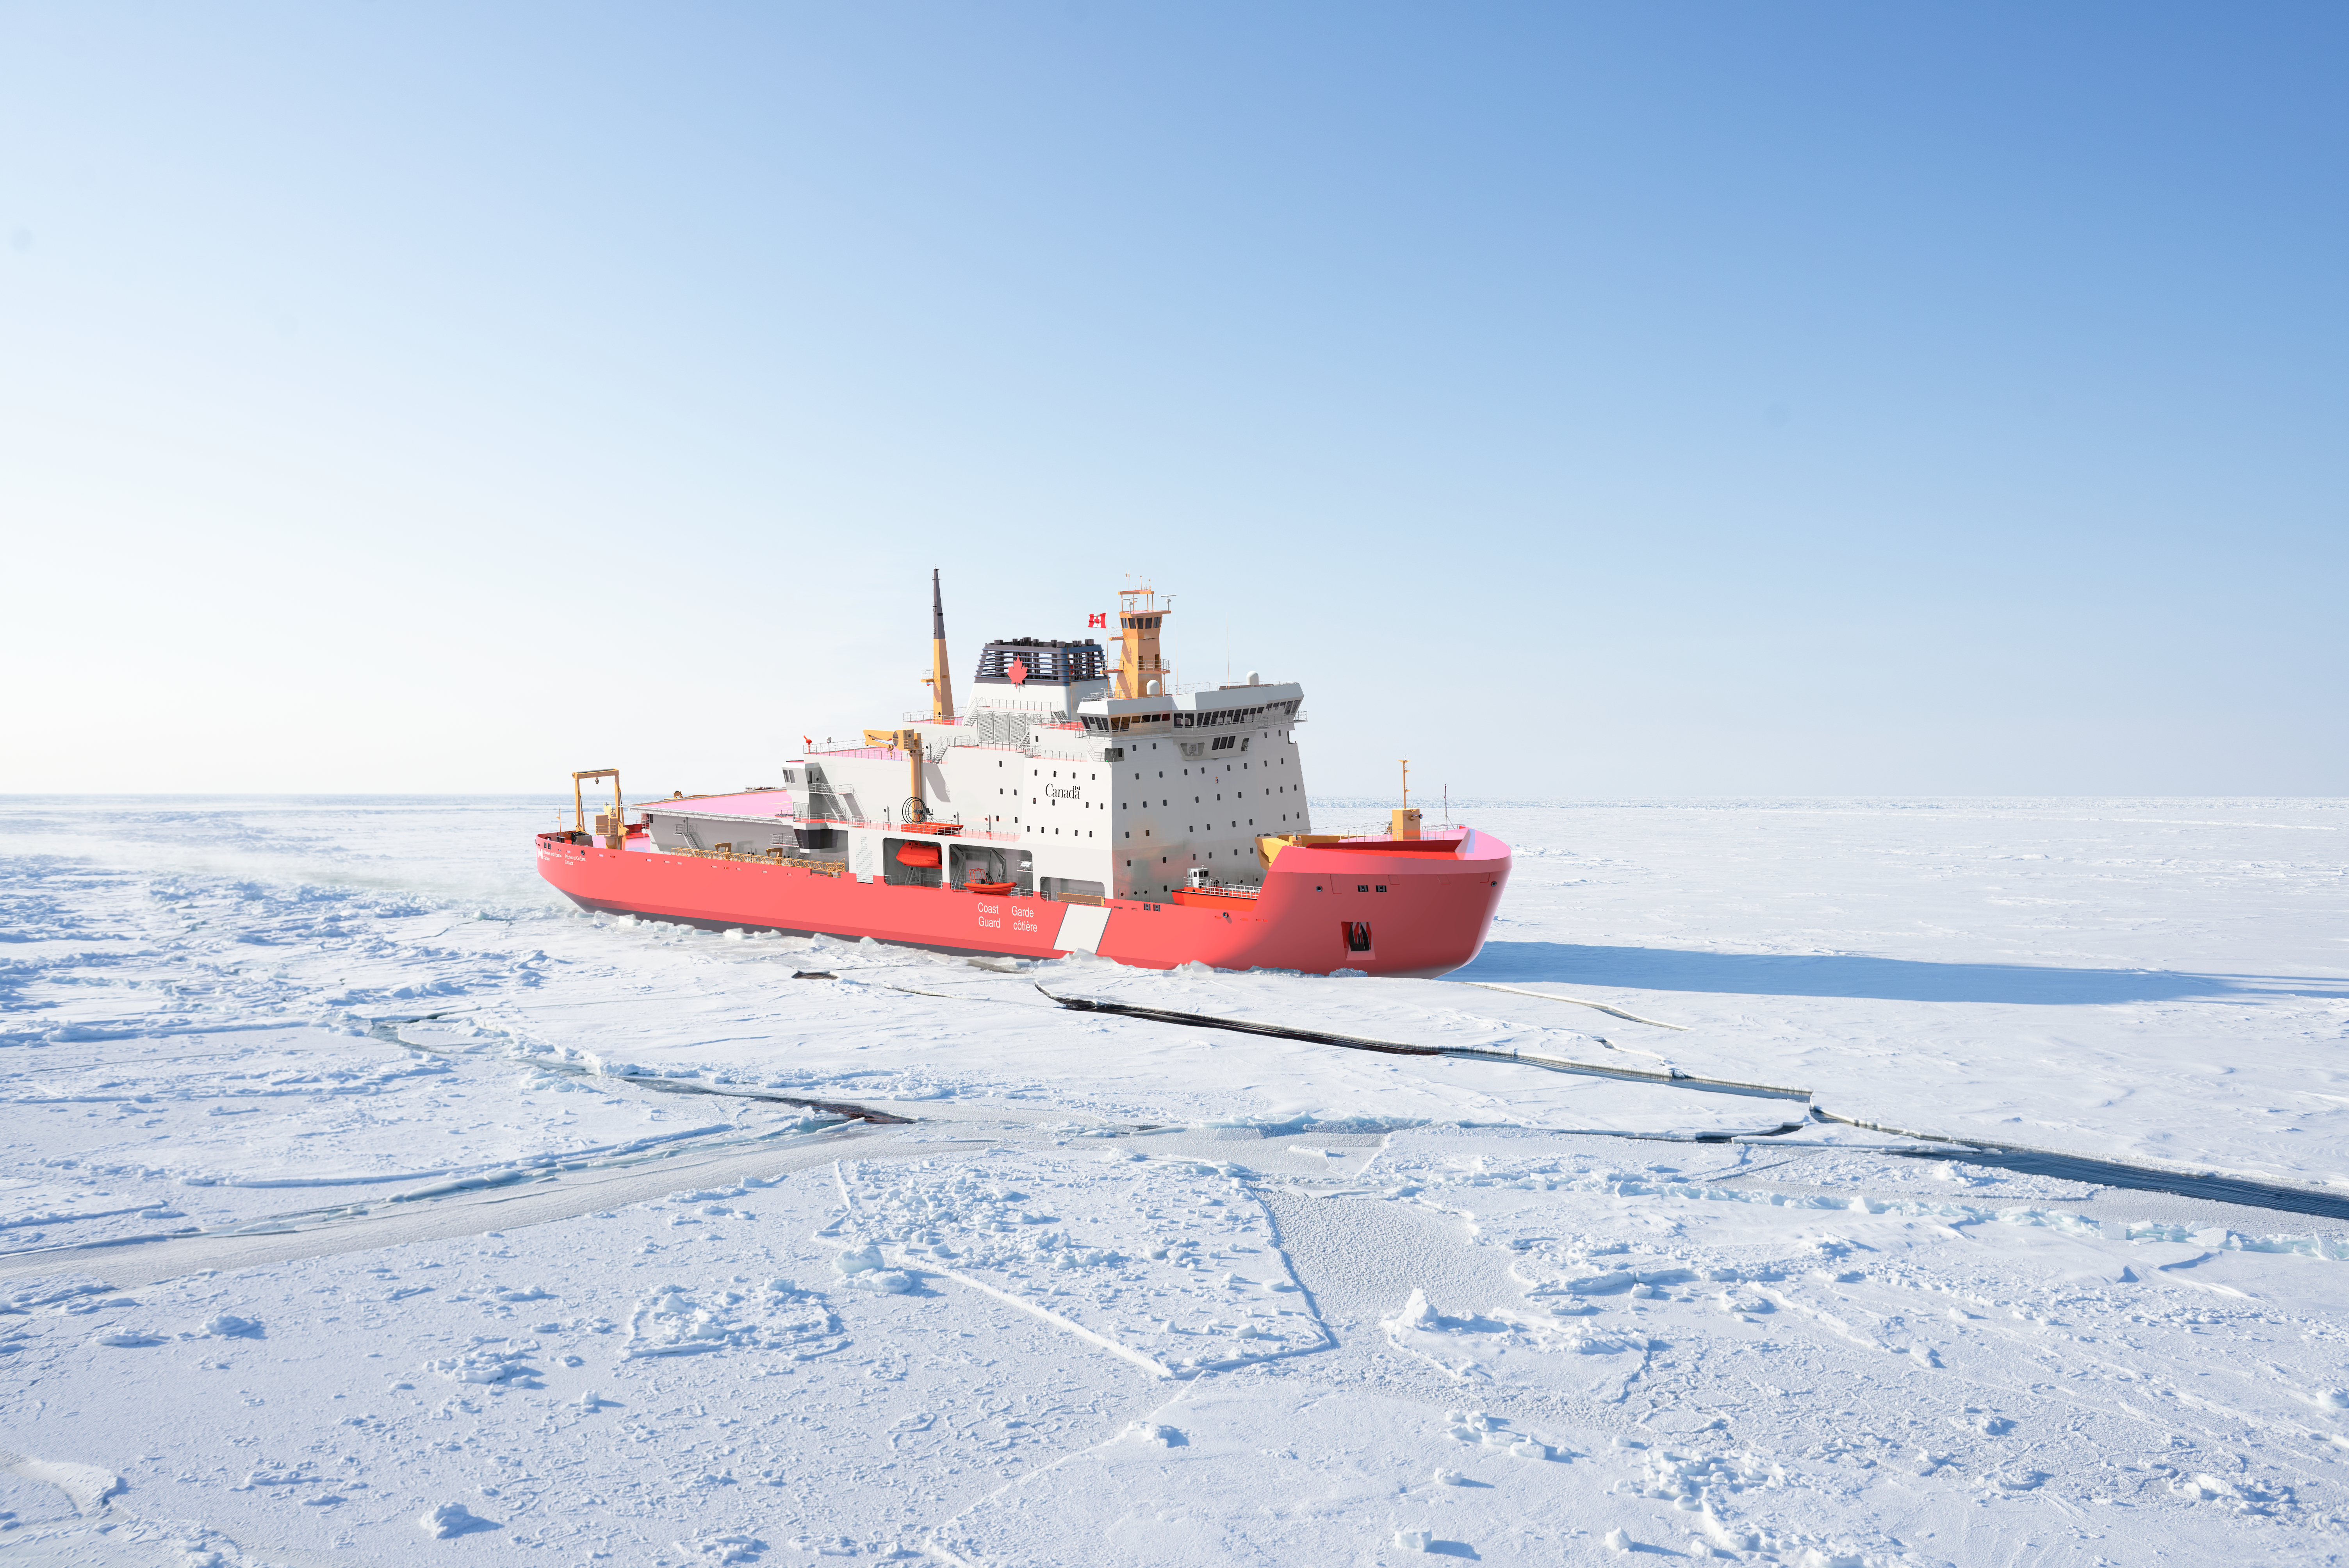 Canada’s future Polar Icebreakers will be built by Seaspan and Davie and are urgently required to help assert Canadian sovereignty in the Arctic Credit: Seaspan